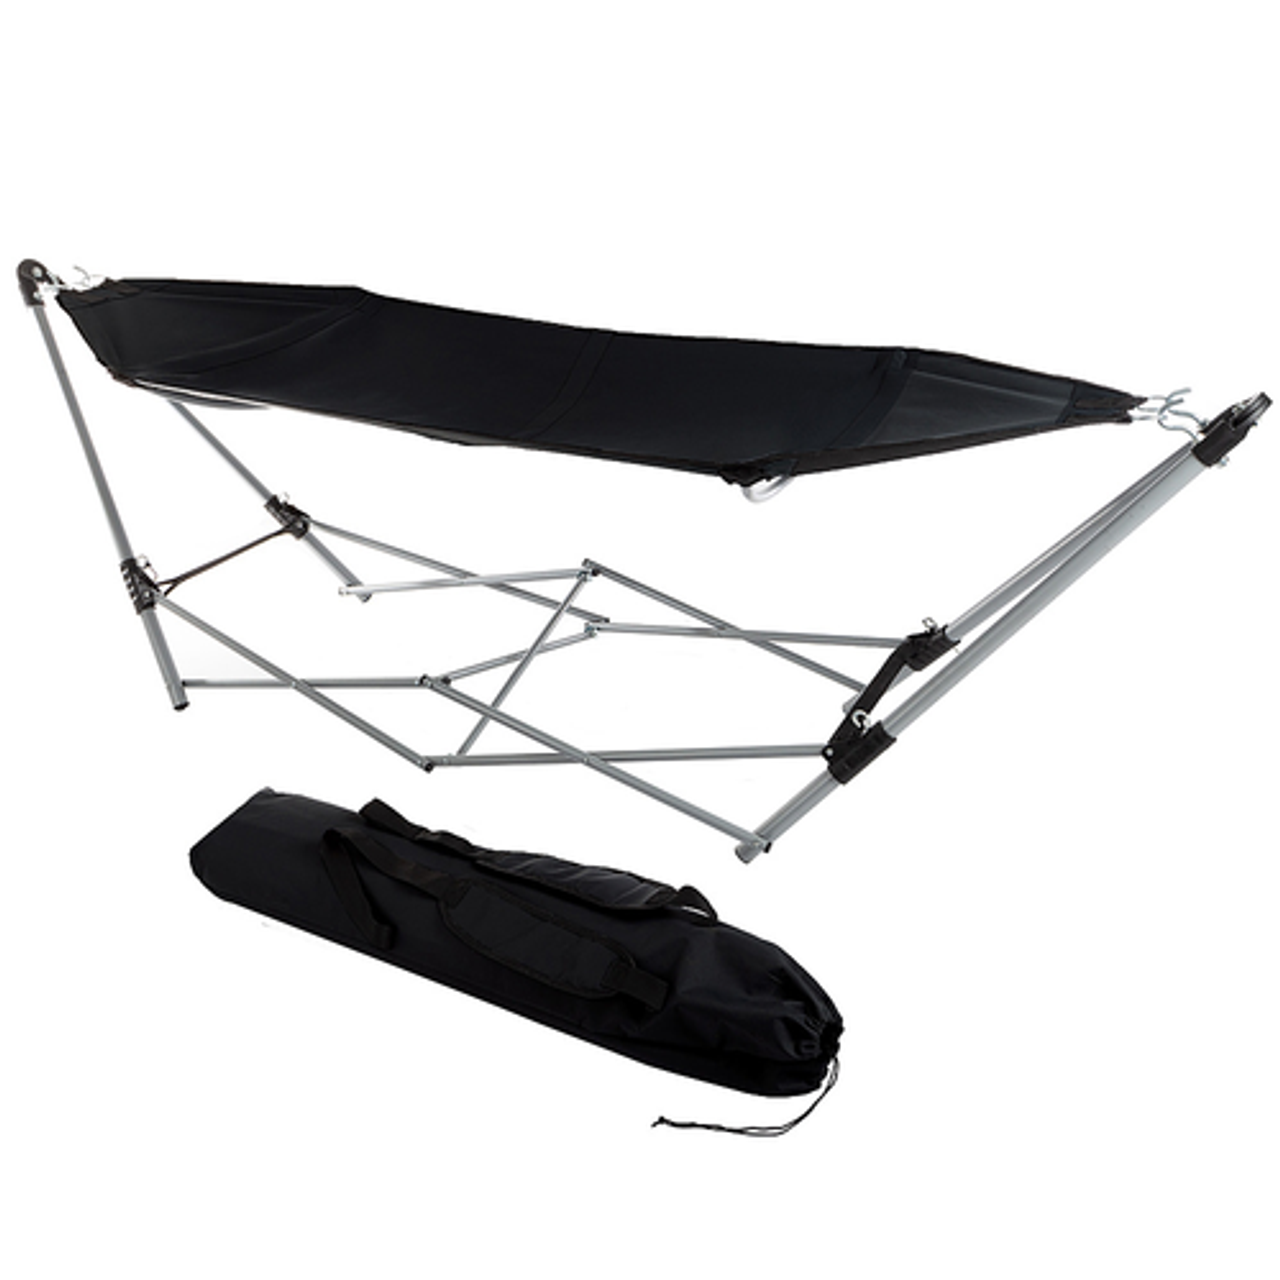 Hastings Home - Portable Hammock with Stand - Folds and Fits into Included Carry Bag for Easy Travel- Perfect for Backyard, Pool, Beach - Black